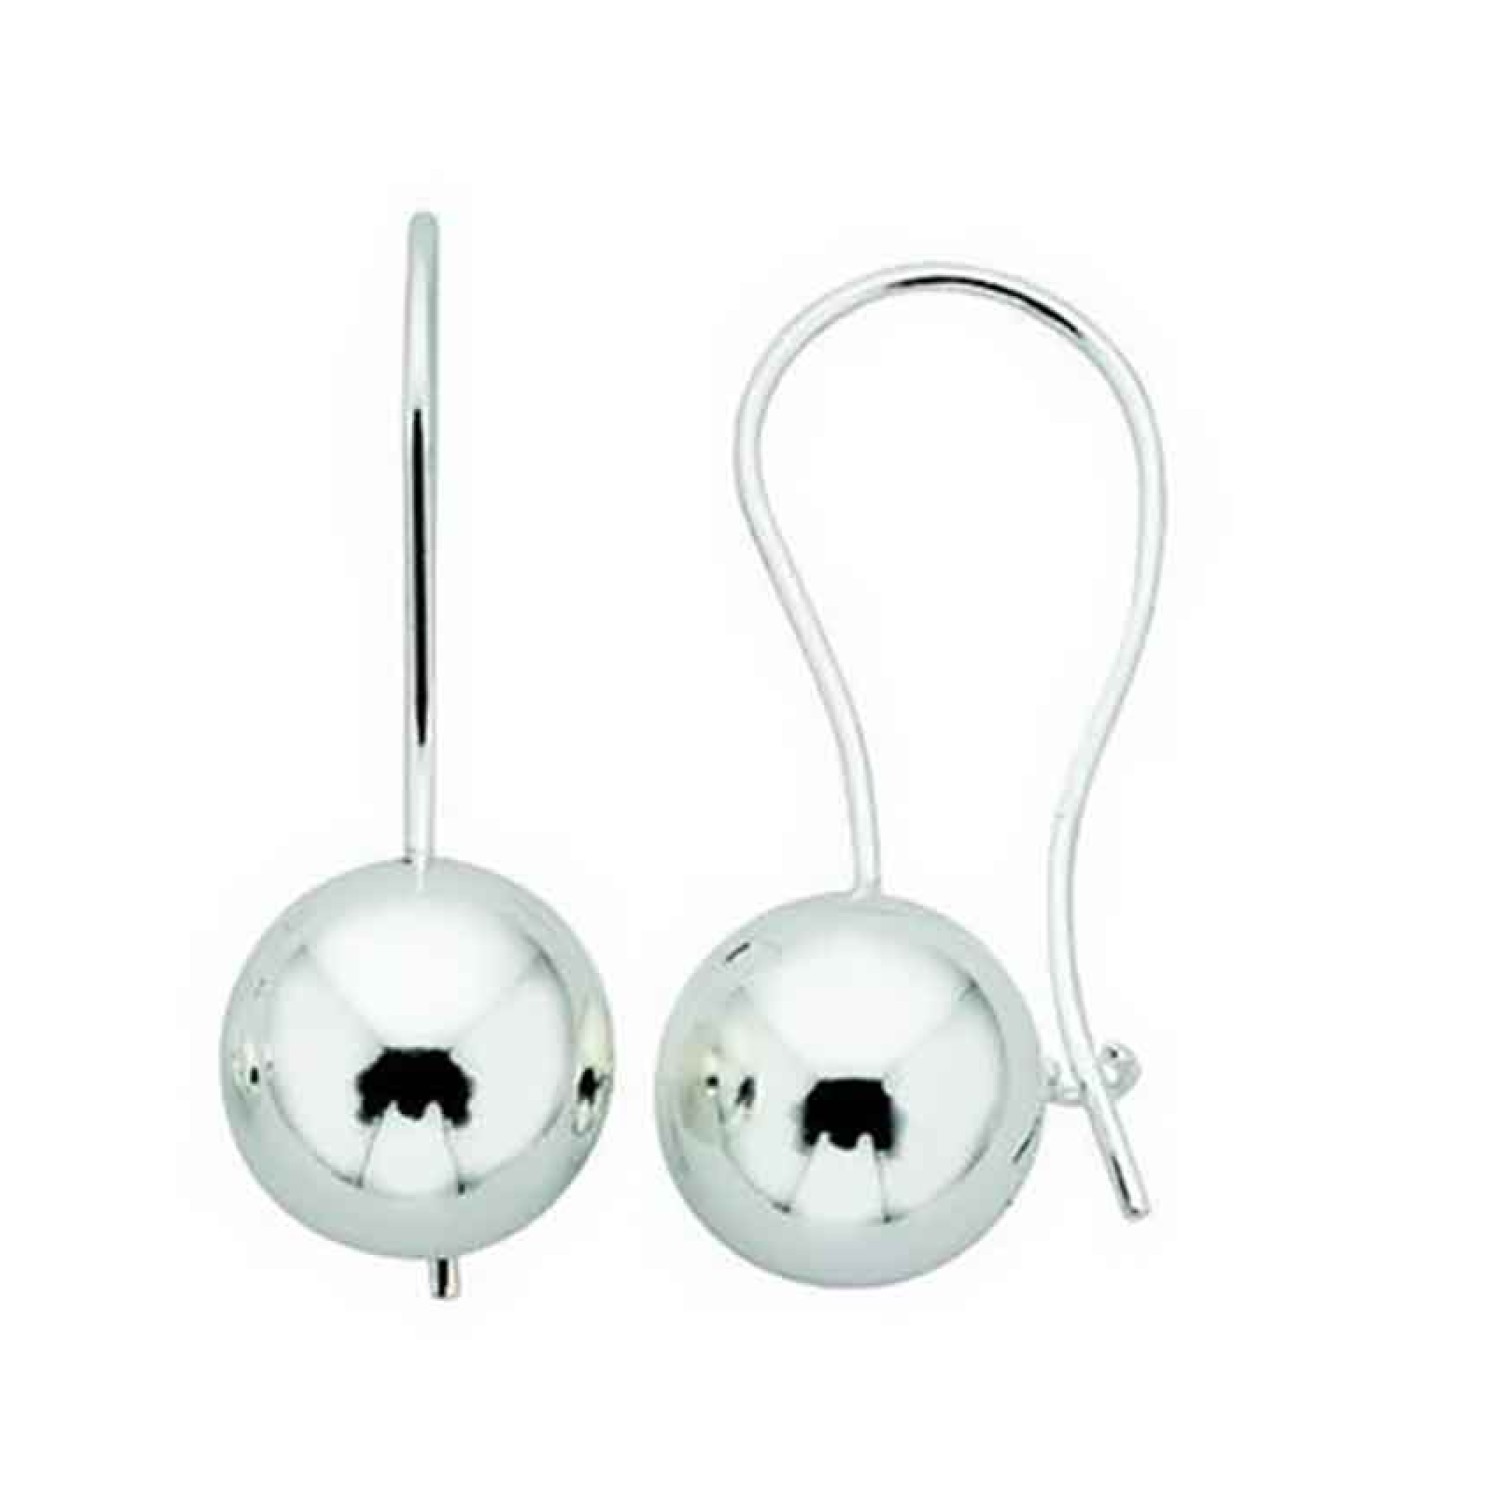 Sterling Silver Italian Euroball Earrings. Silver Euroball earrings with the safety catch....3 Months No Payments and Interest for Q Card holders Oxipay is simply the easier way to pay - use Oxipay and well spread your payment up to a maximum of $1500 ove